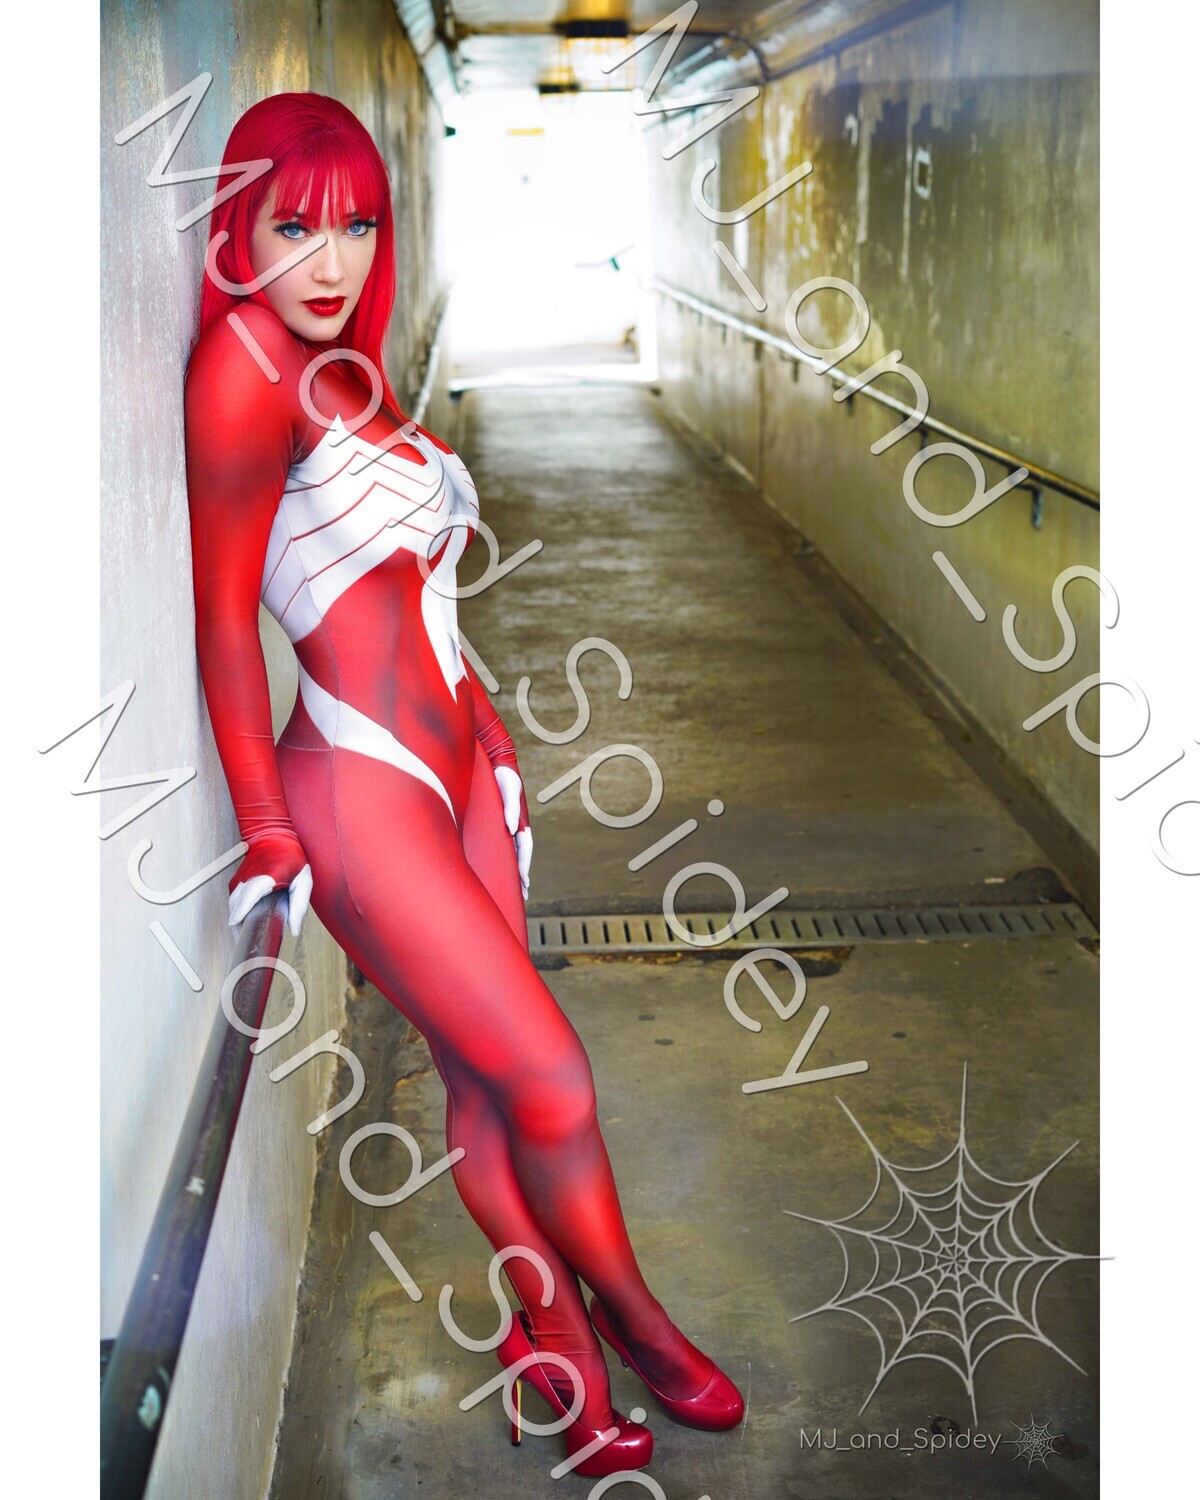 Marvel - Spider-Man - Mary Jane Watson - Ultimate Spider-Woman 1 -  Cosplay Print (@MJ_and_Spidey, MJ and Spidey, Comics)